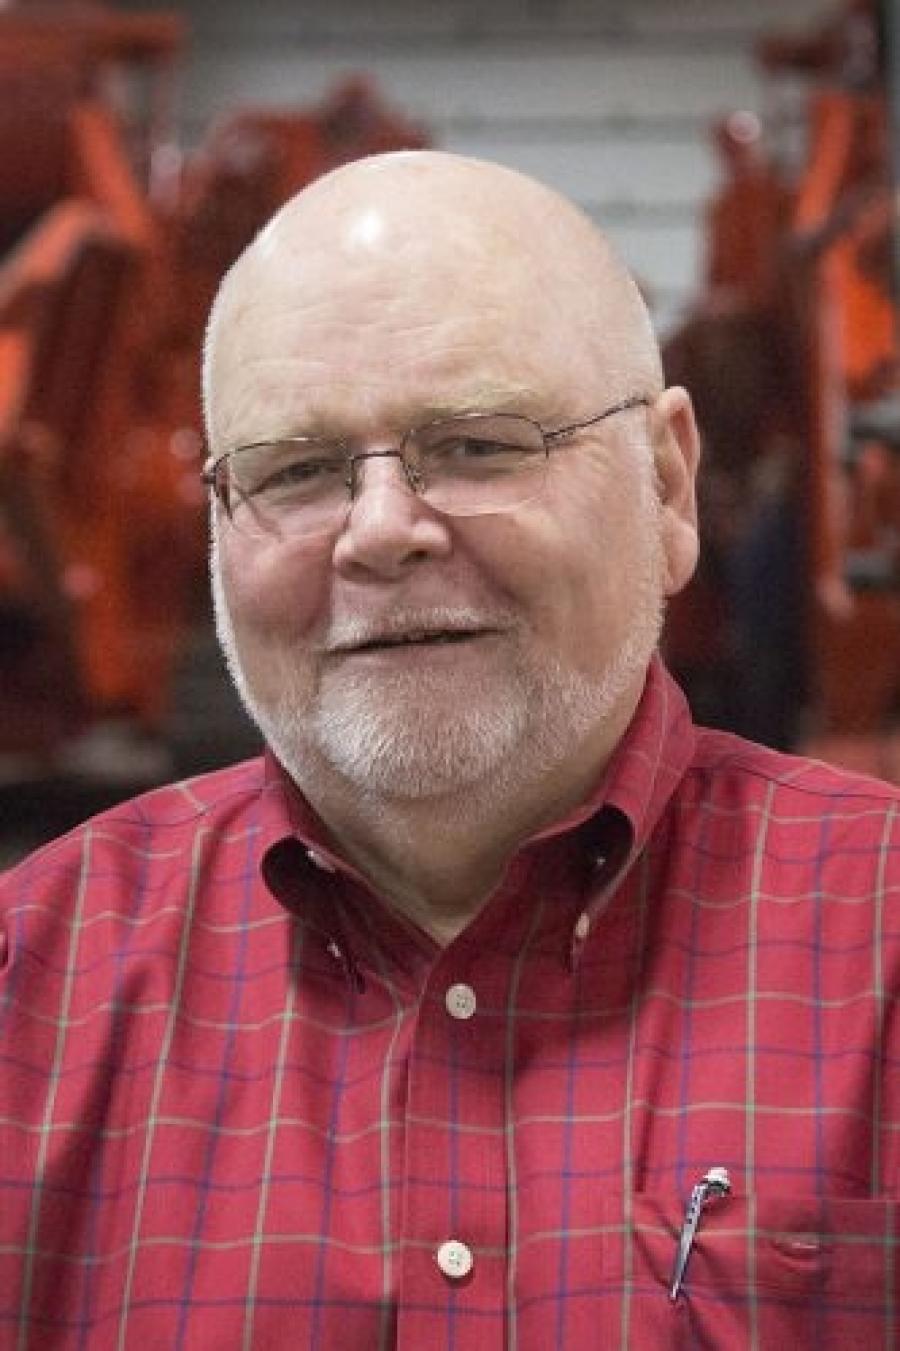 Morbark has announced that its President, James W. Shoemaker Jr., has retired after 13 years with the Company.